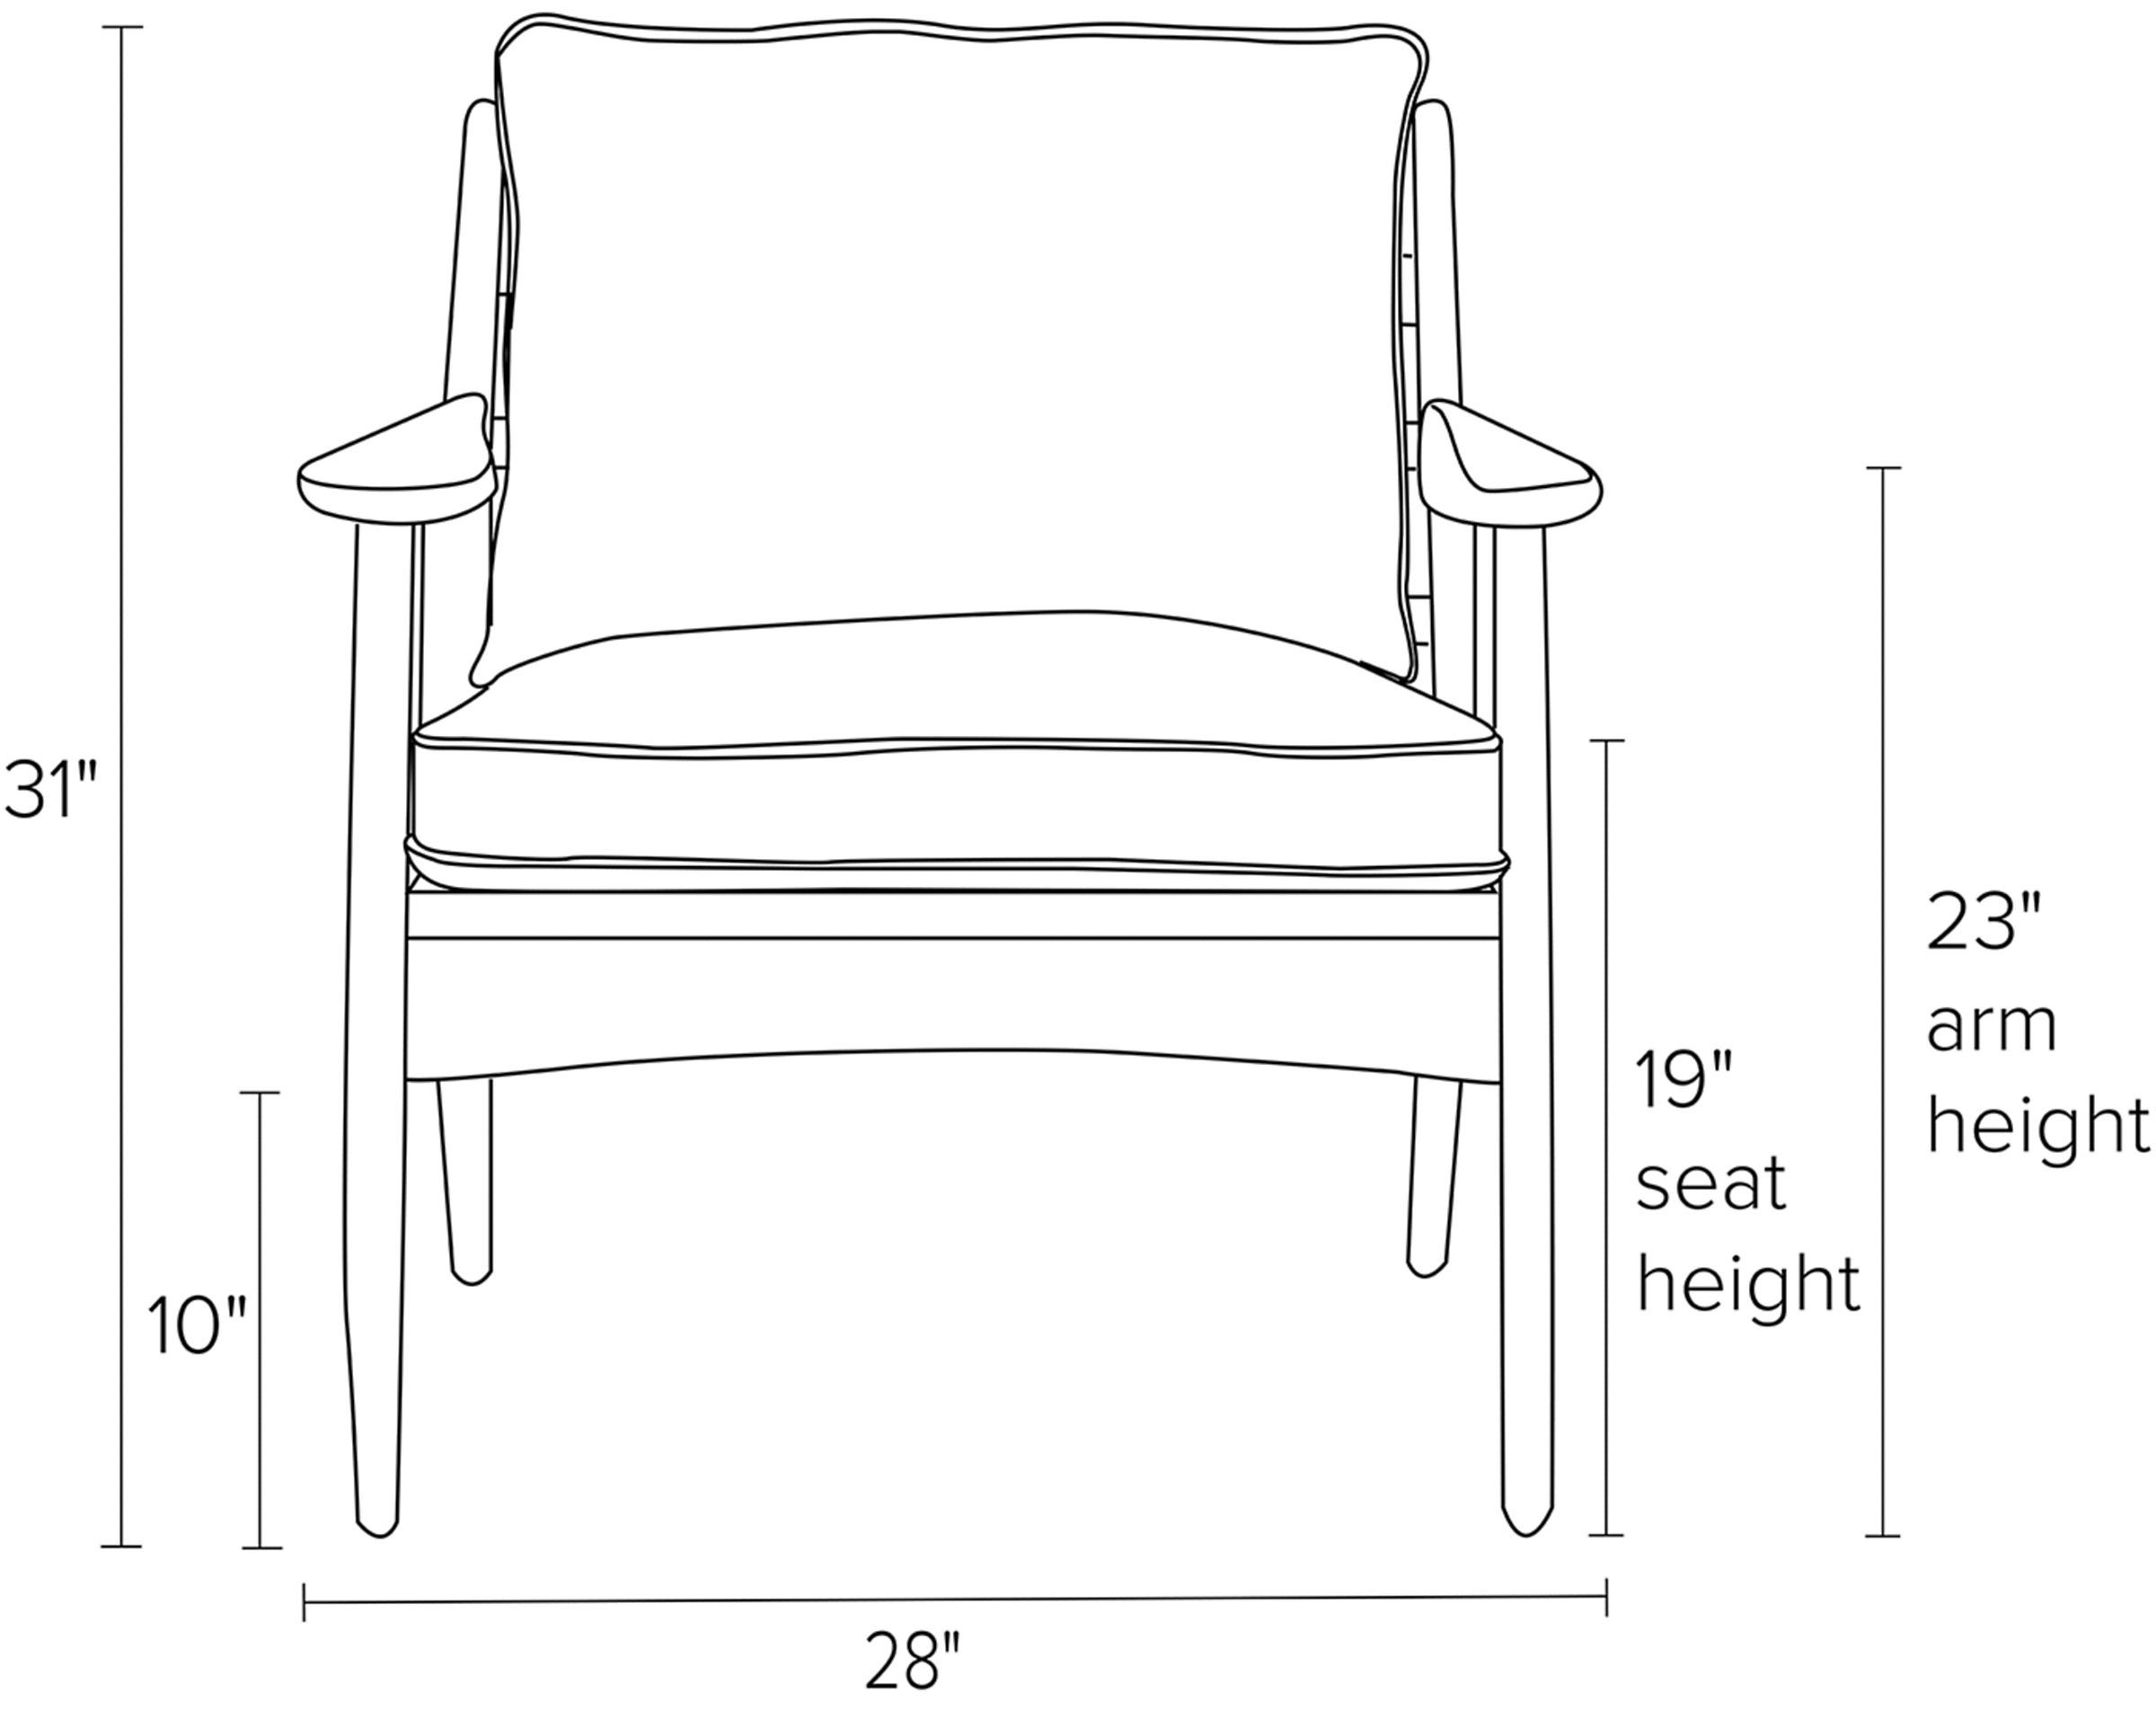 Front view dimension illustration of Ericson chair.